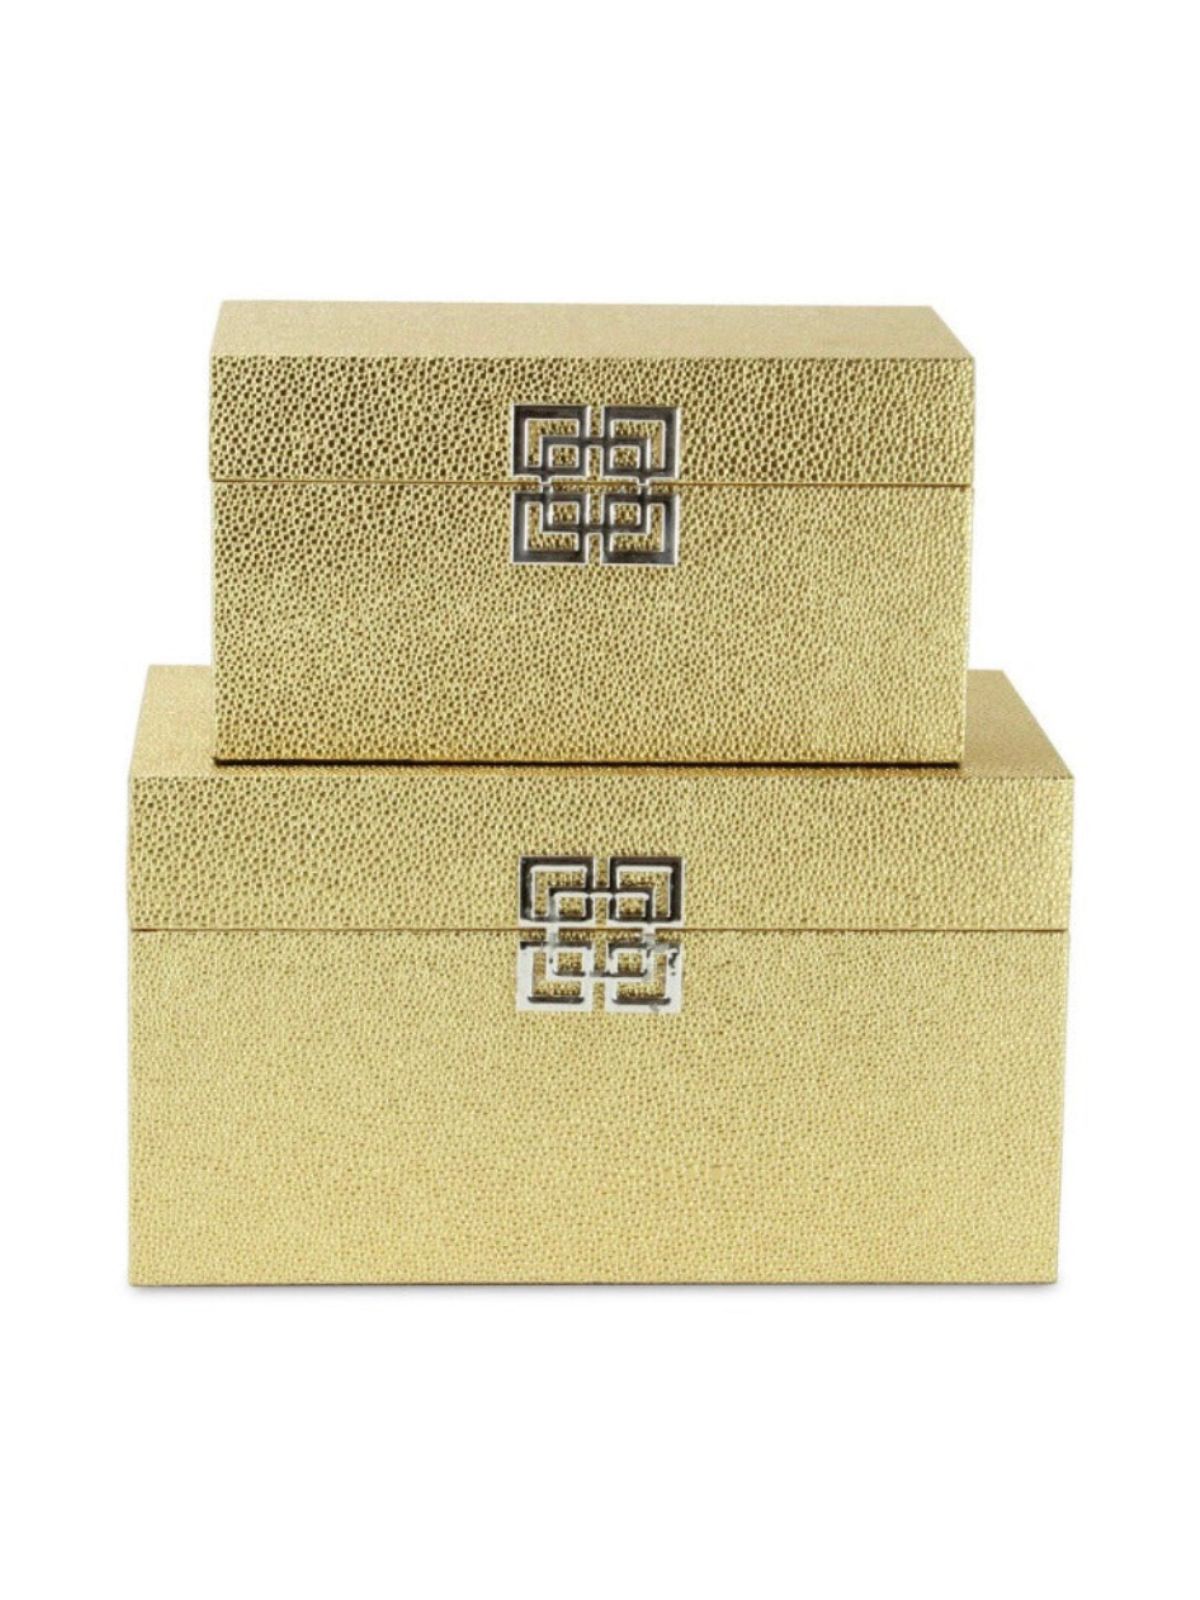 Keepsake boxes have provided a unique elegant touch to many spaces. Perfect for storing treasured items, they provide an eye-catching and warm look. The Doppia Felicita Box Set features a gold shagreen body with a Happiness symbolic front handle!